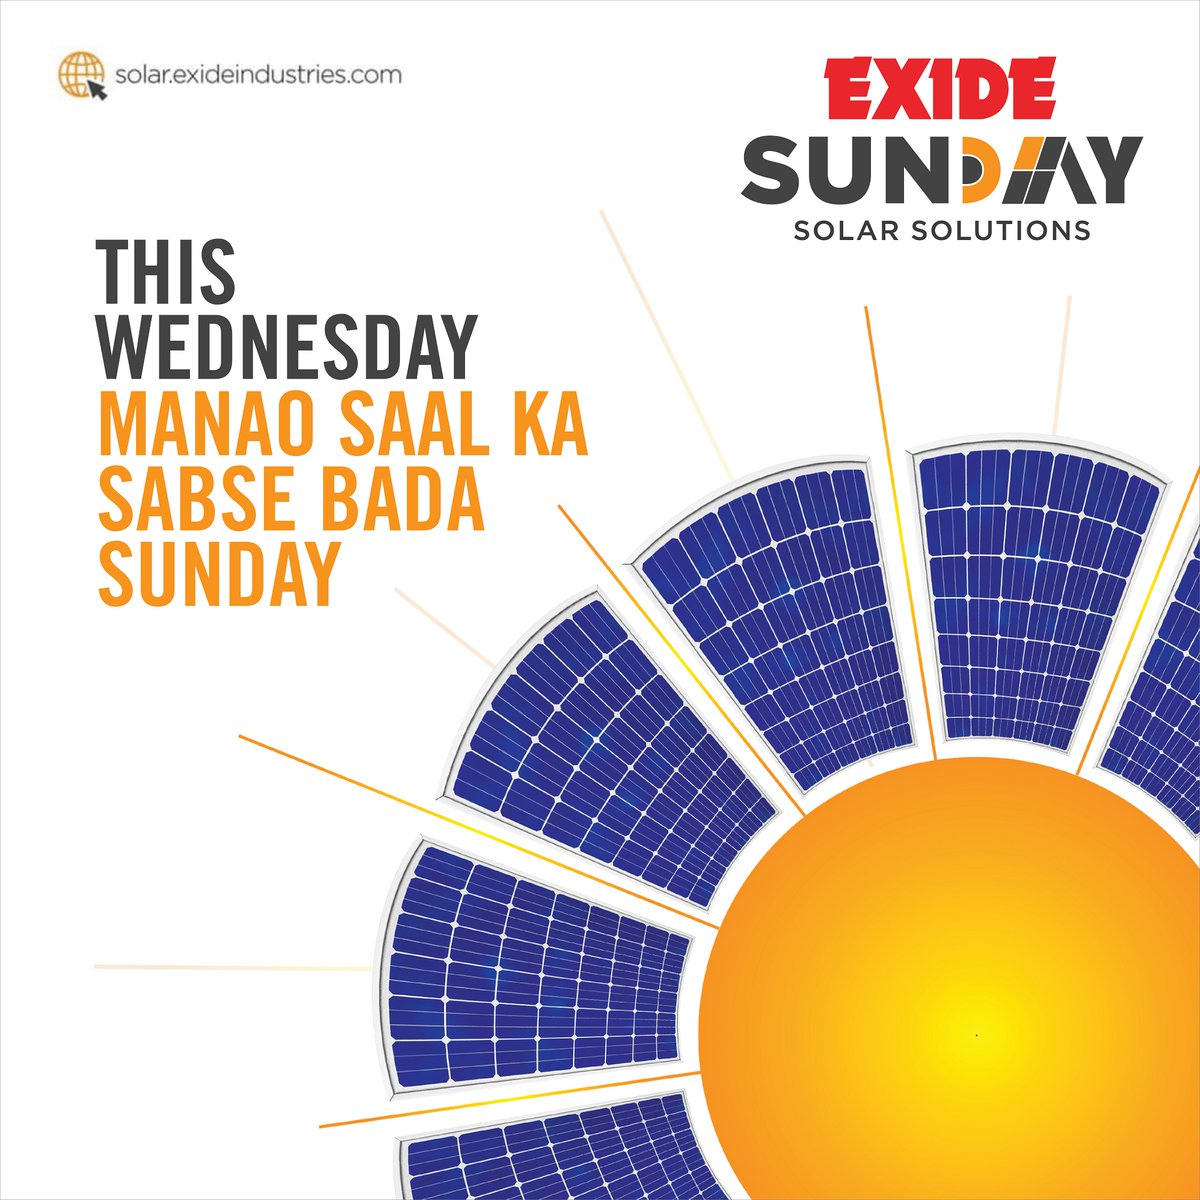 Today, on Summer Solstice, the sun will be up for the longest time in a day. So make the most of it, and get the maximum solar power from it, aaraam se, with Exide Sunday! Log on to solar.exideindustries.com

#SolarPower #Exide #SustainableEnergy #SundayLiving